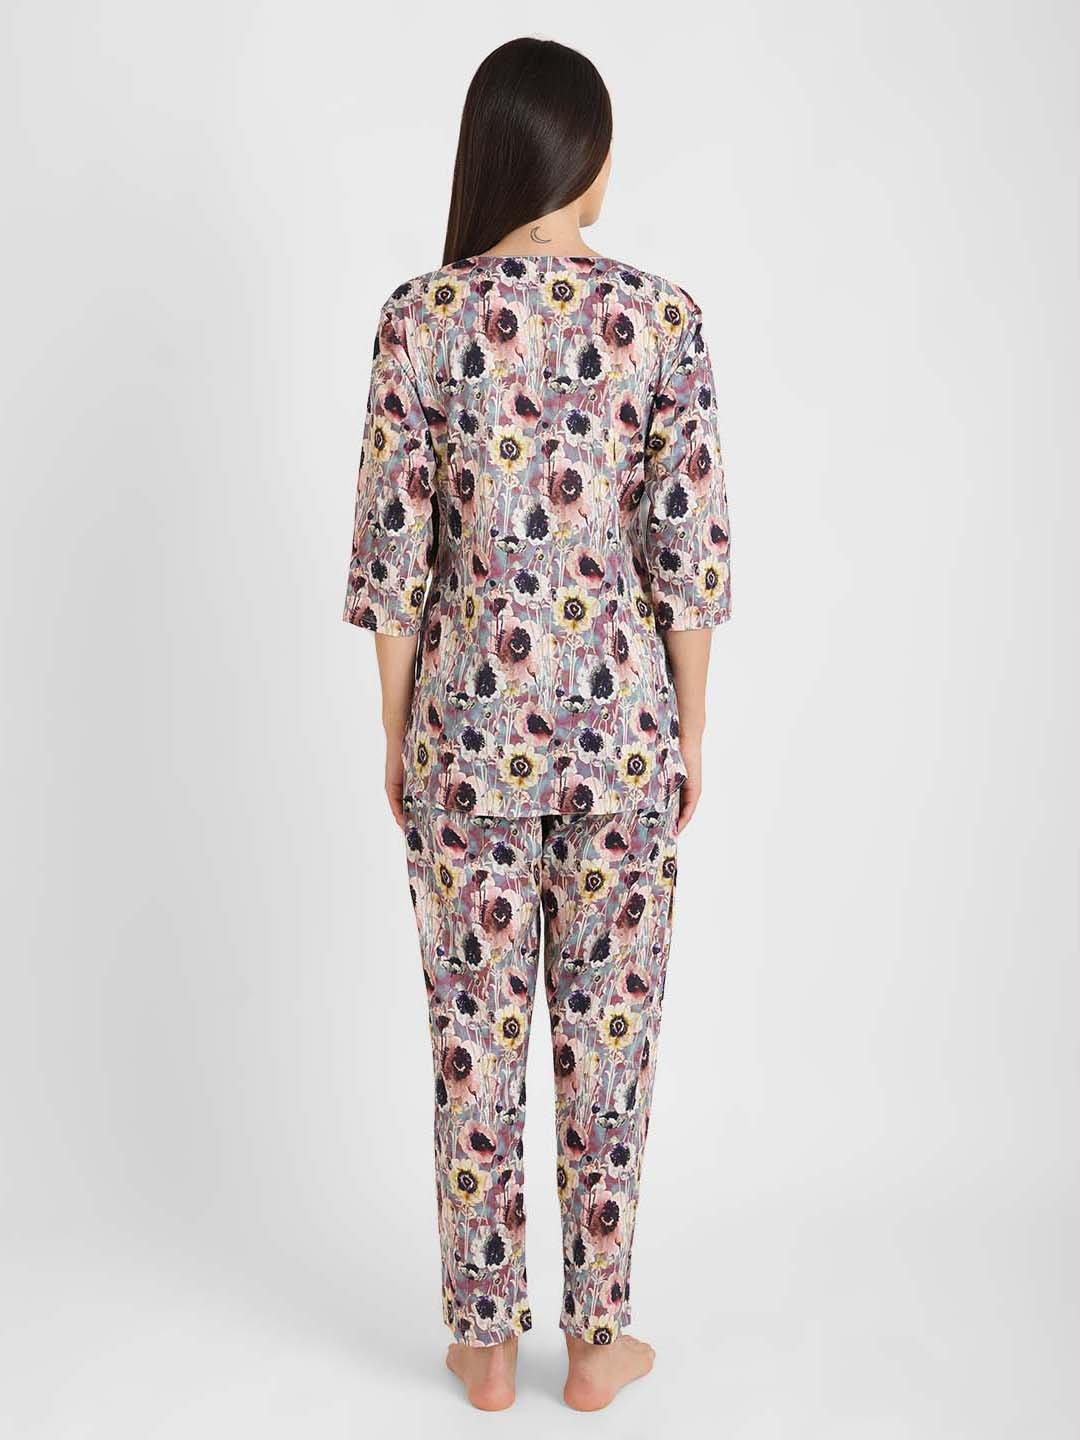 Mauve Floral Printed Nightsuit Set for Women